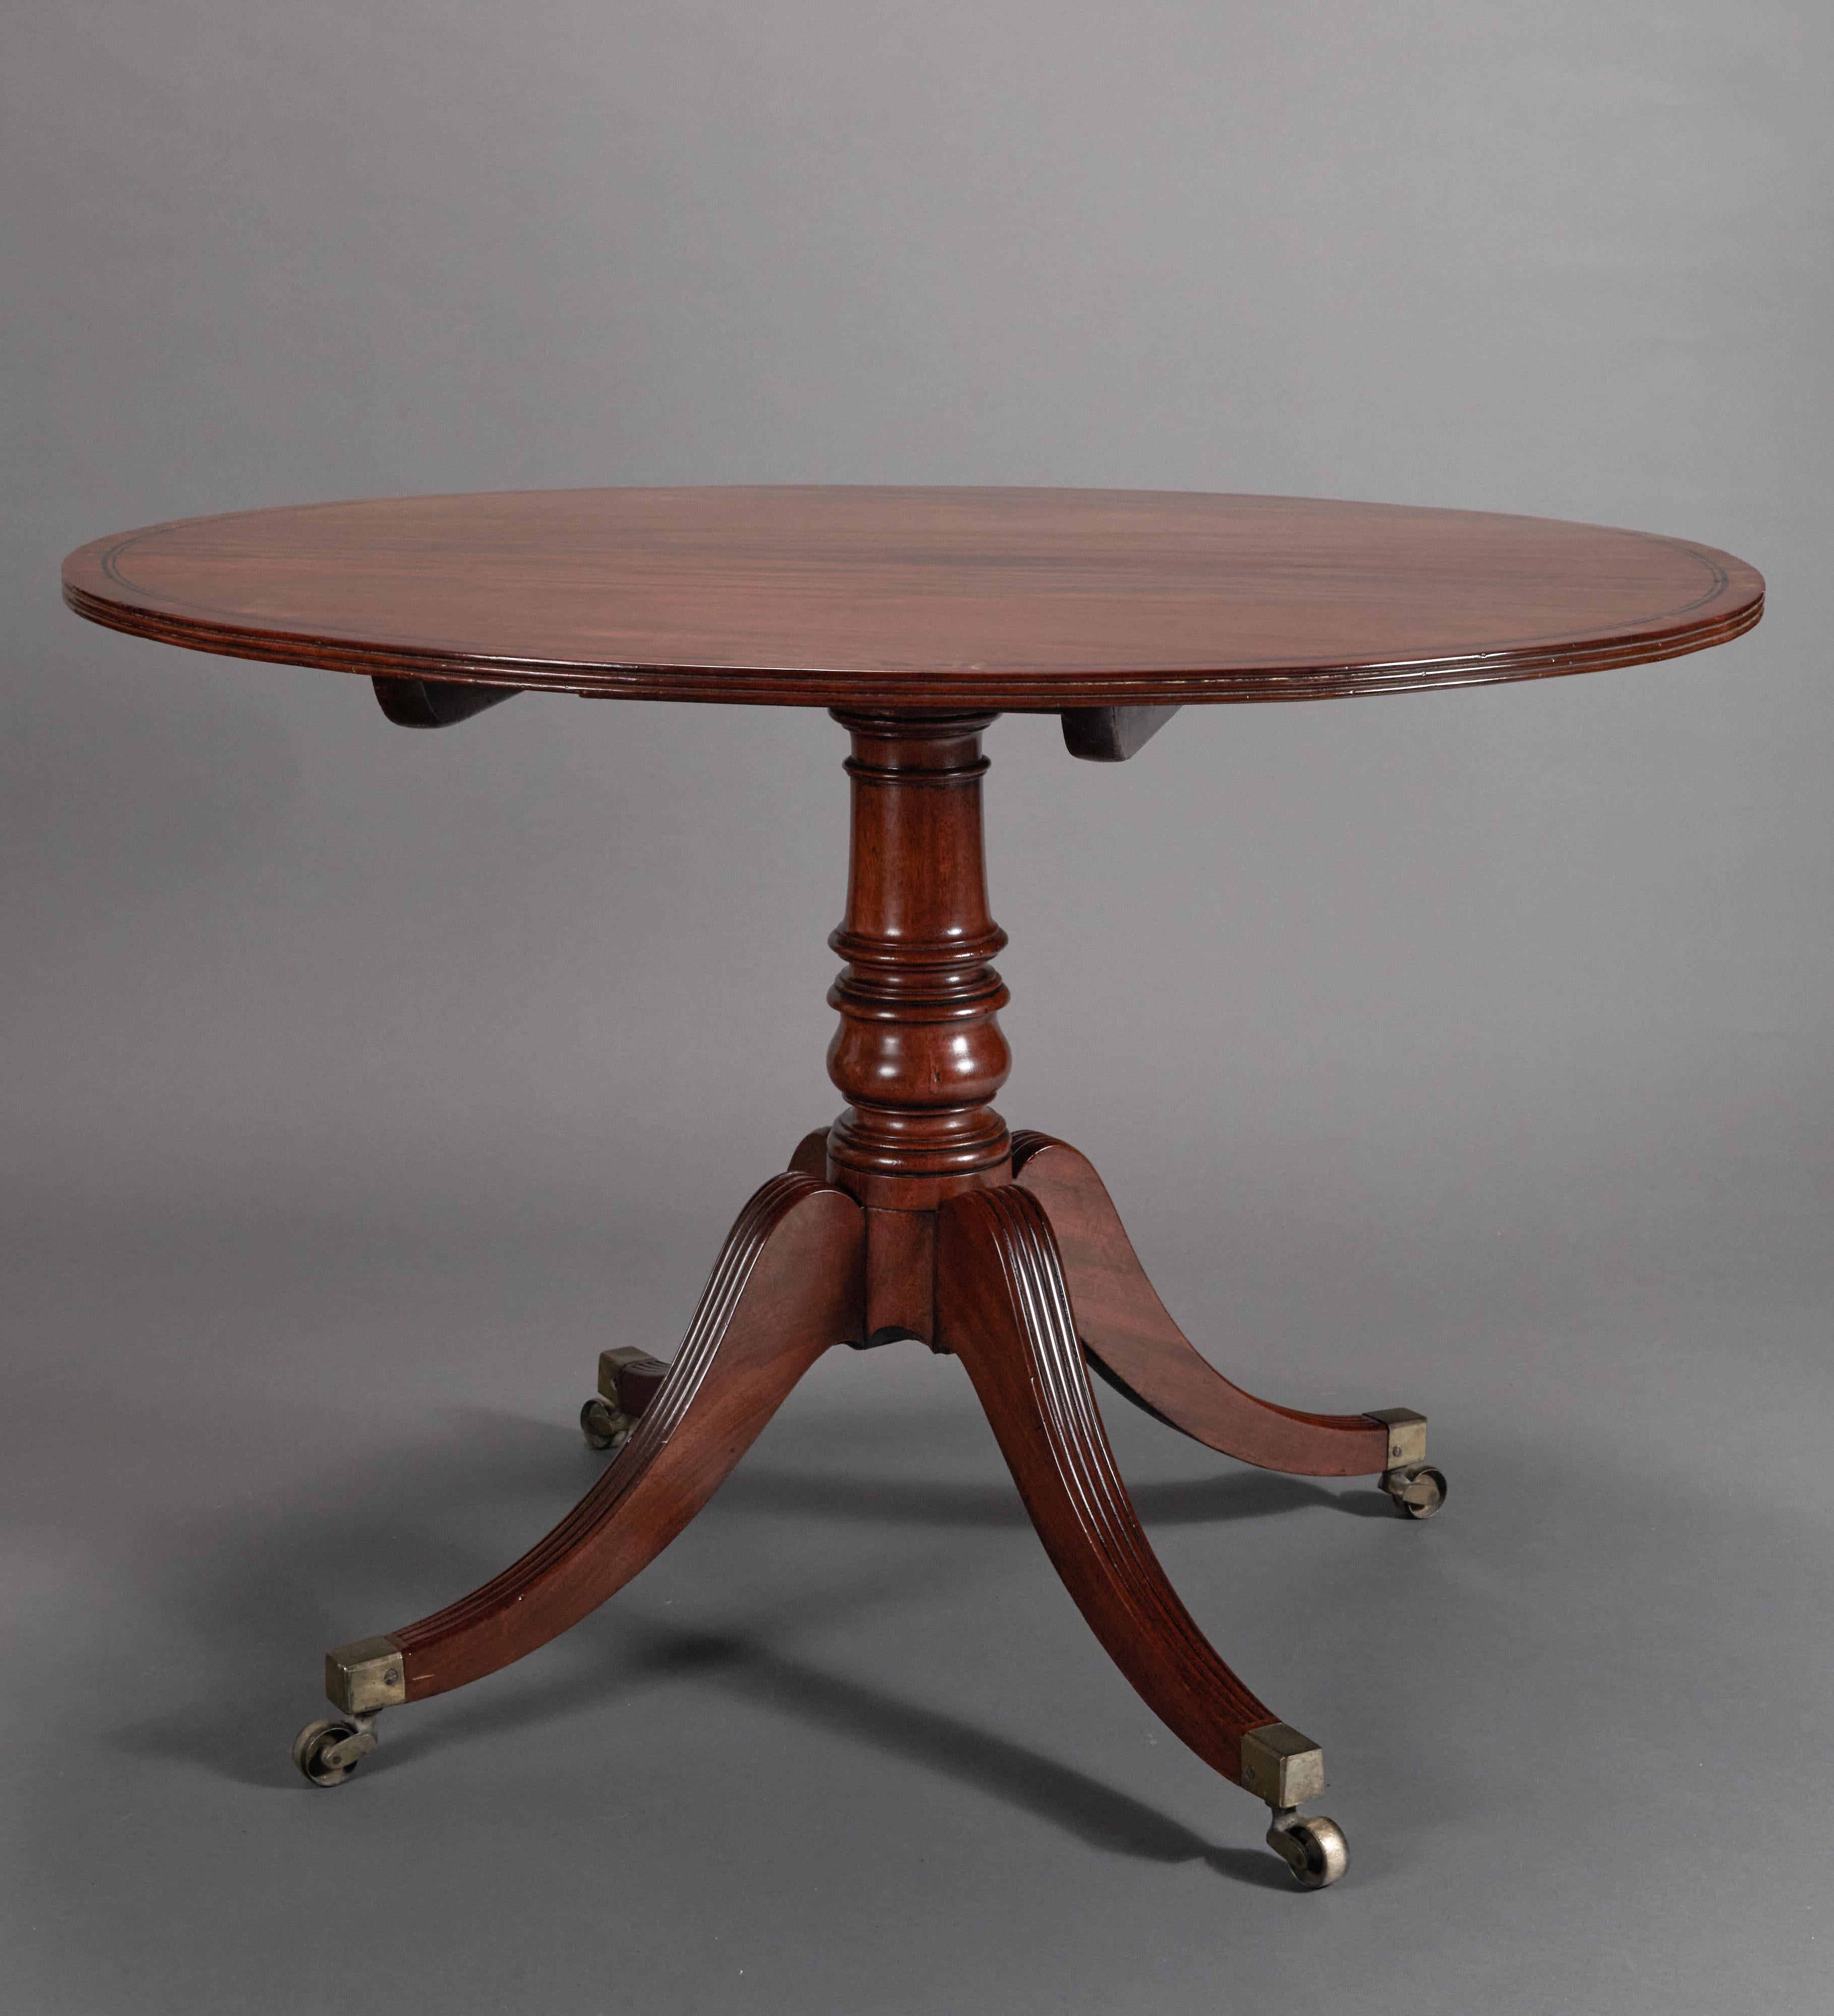 The circular solid mahogany tilt-top with two bands of ebony inlay, sits upon a turned pedestal with downward swept reeded legs with castors.